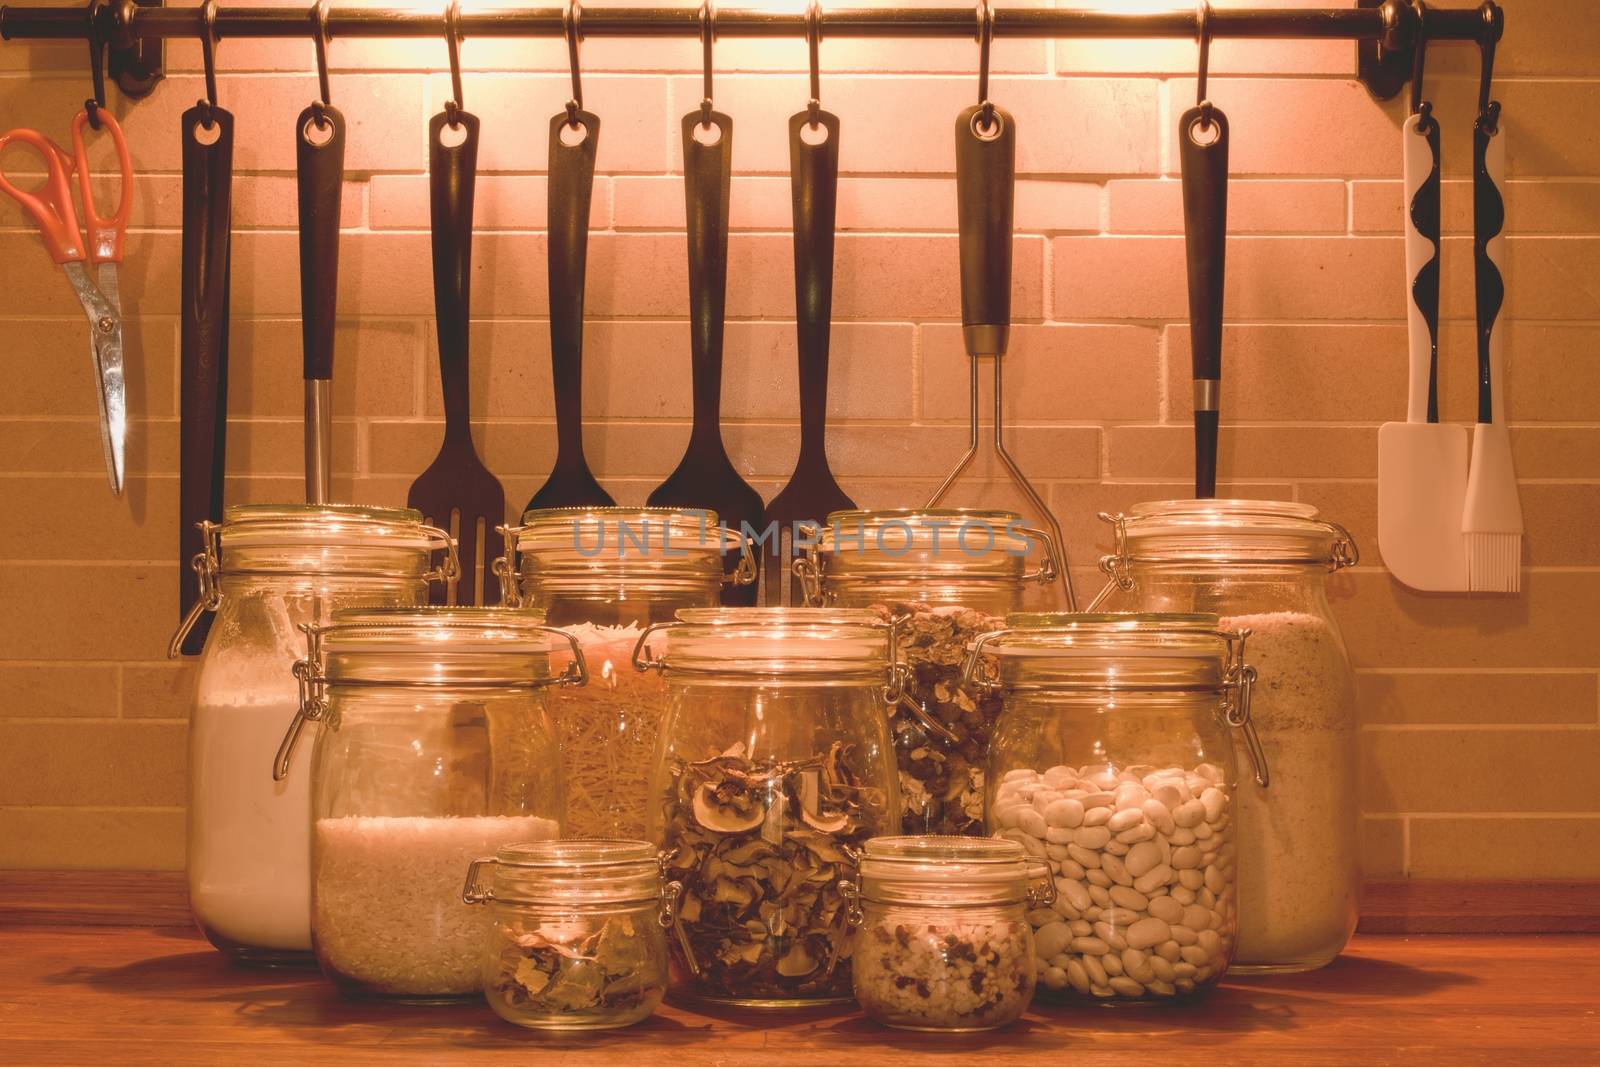 Kitchen jars for kitchen ingredients. Kitchen tools for cooking. Add soft filter by roman_nerud